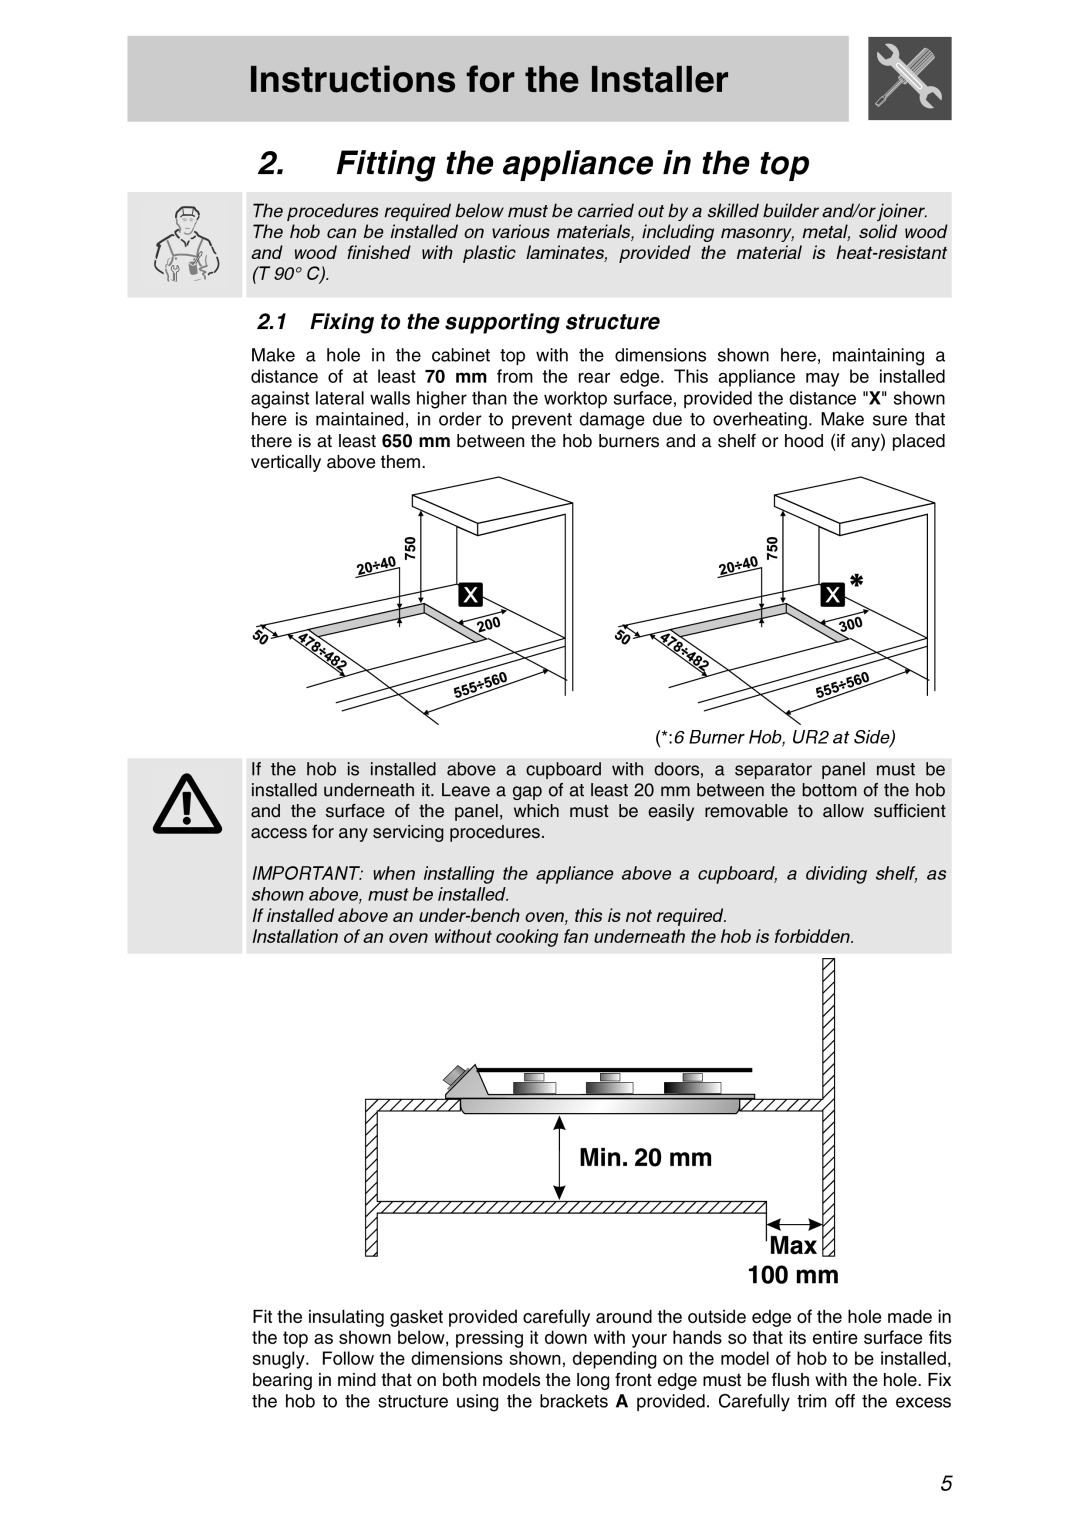 Smeg PTSA727X manual Instructions for the Installer, Fitting the appliance in the top, Fixing to the supporting structure 